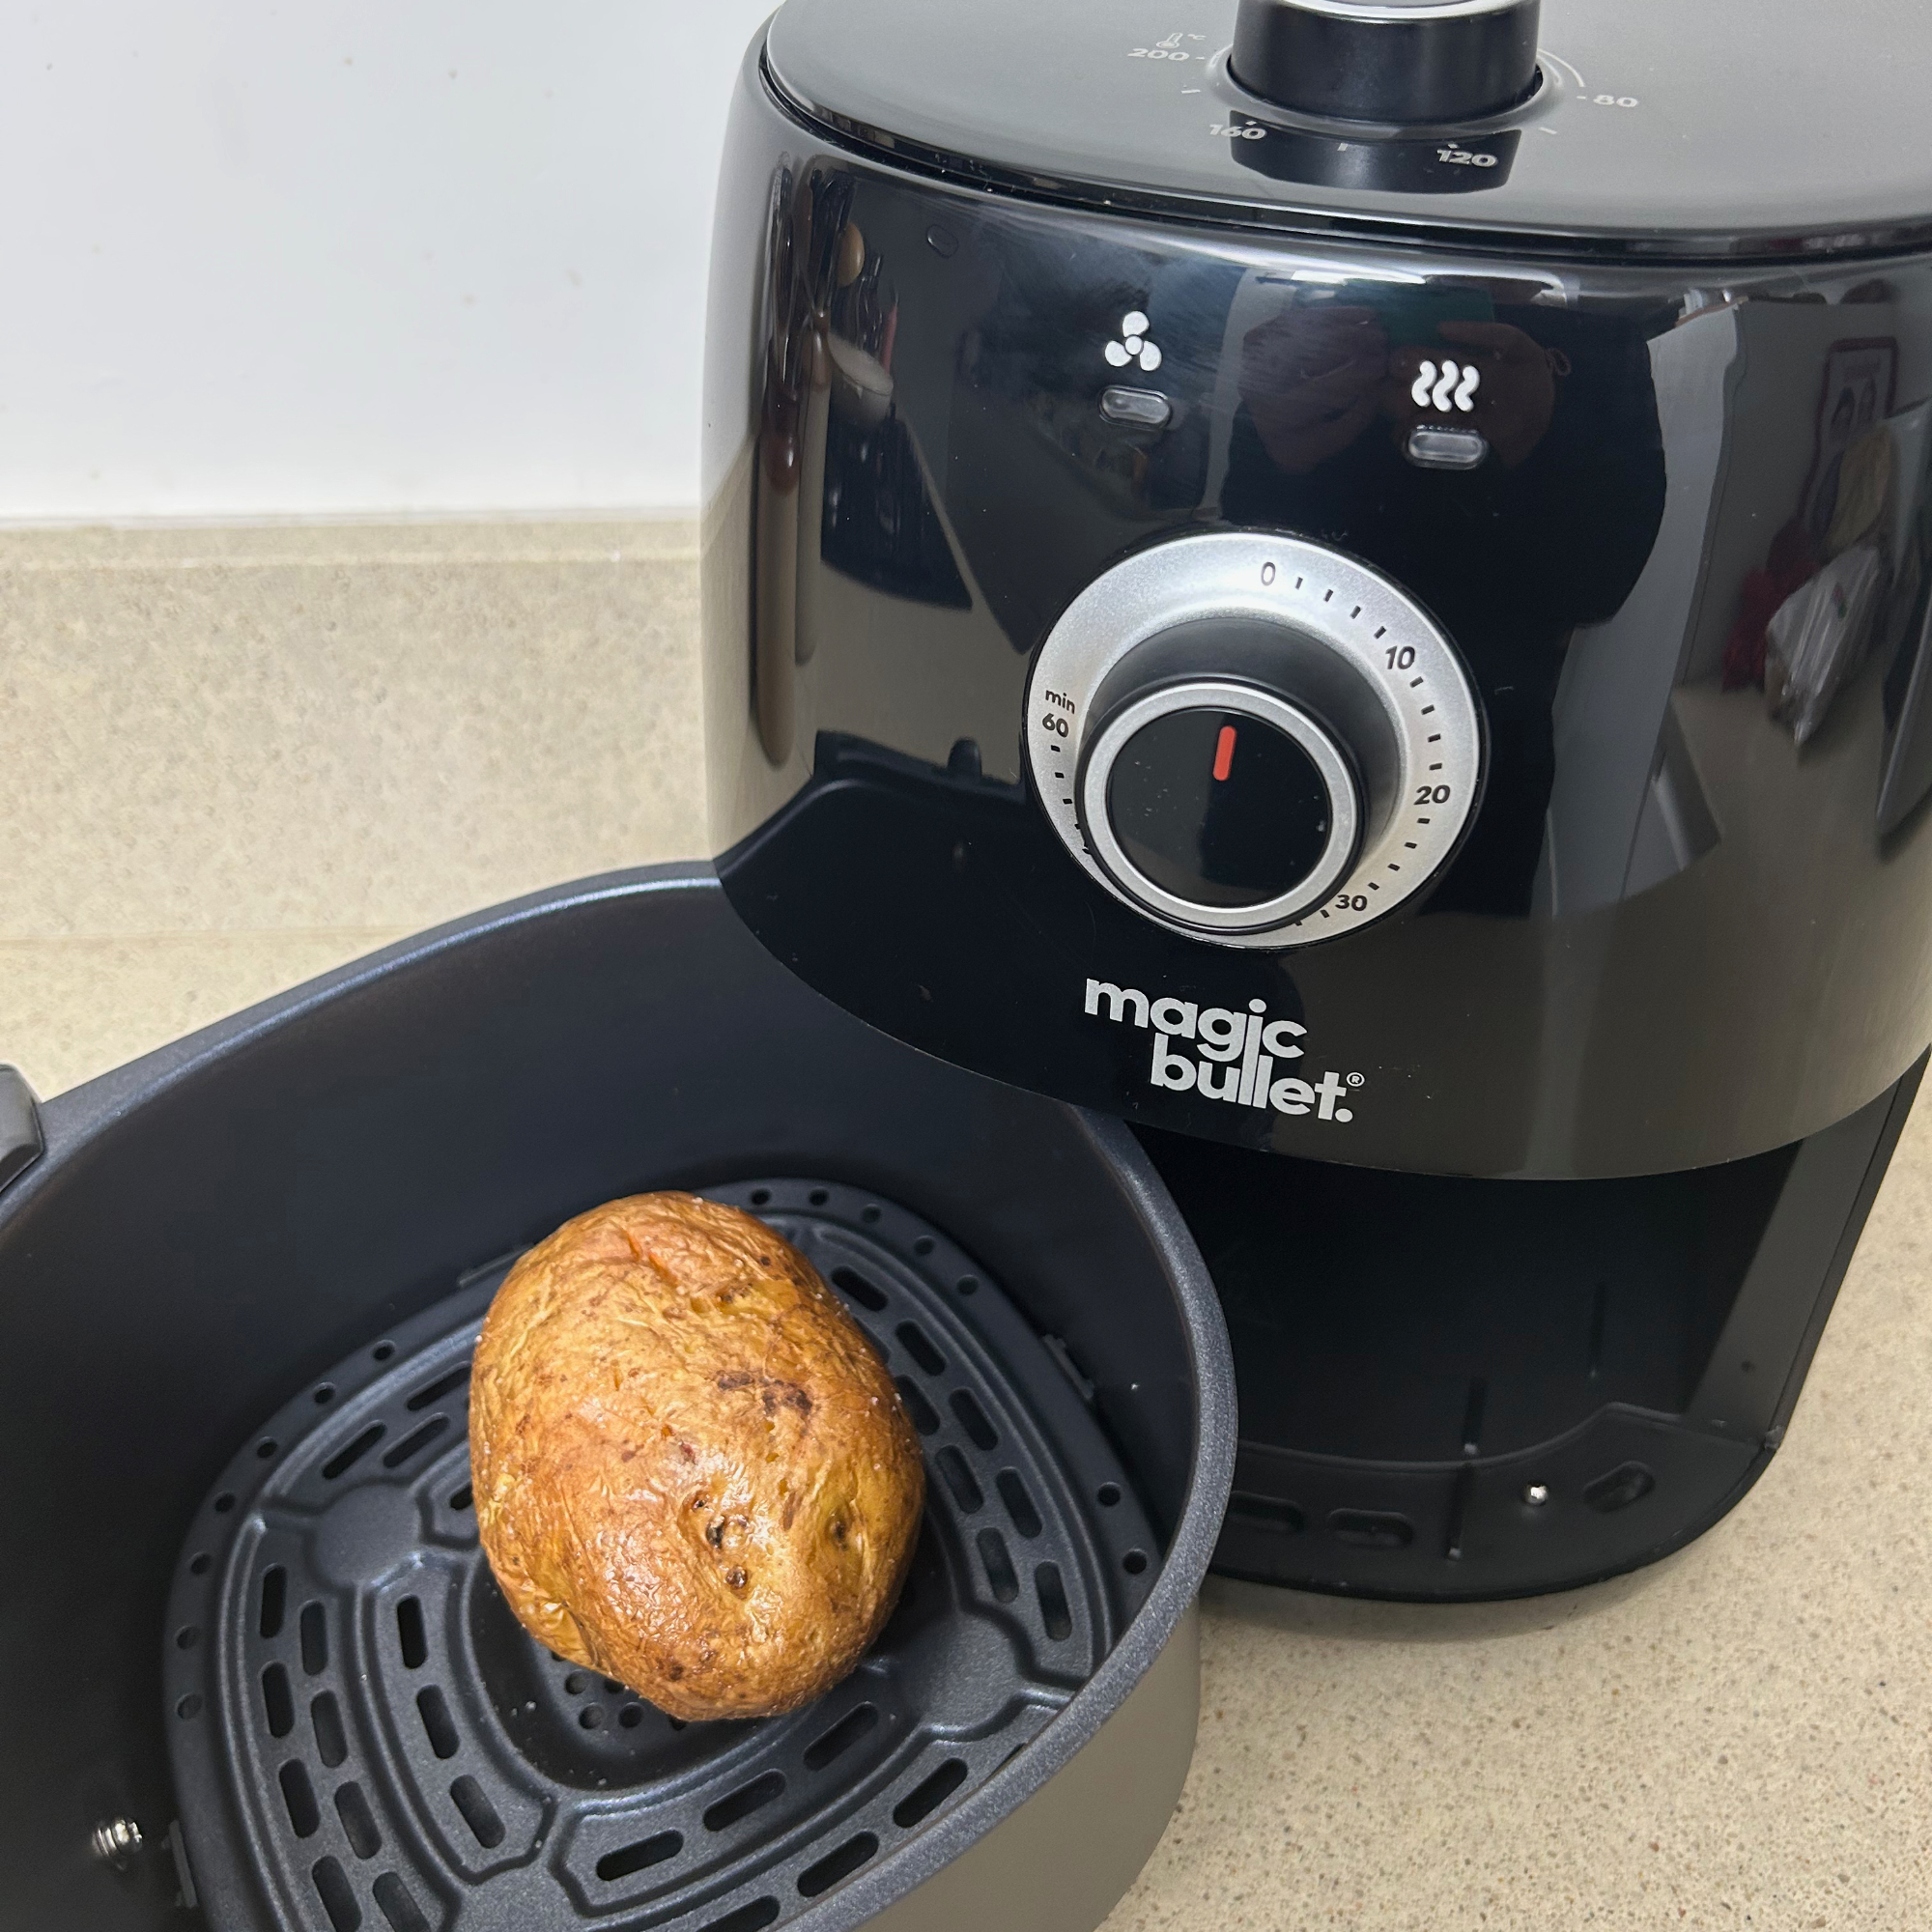 How to cook a jacket potato in air fryer in 3 easy steps